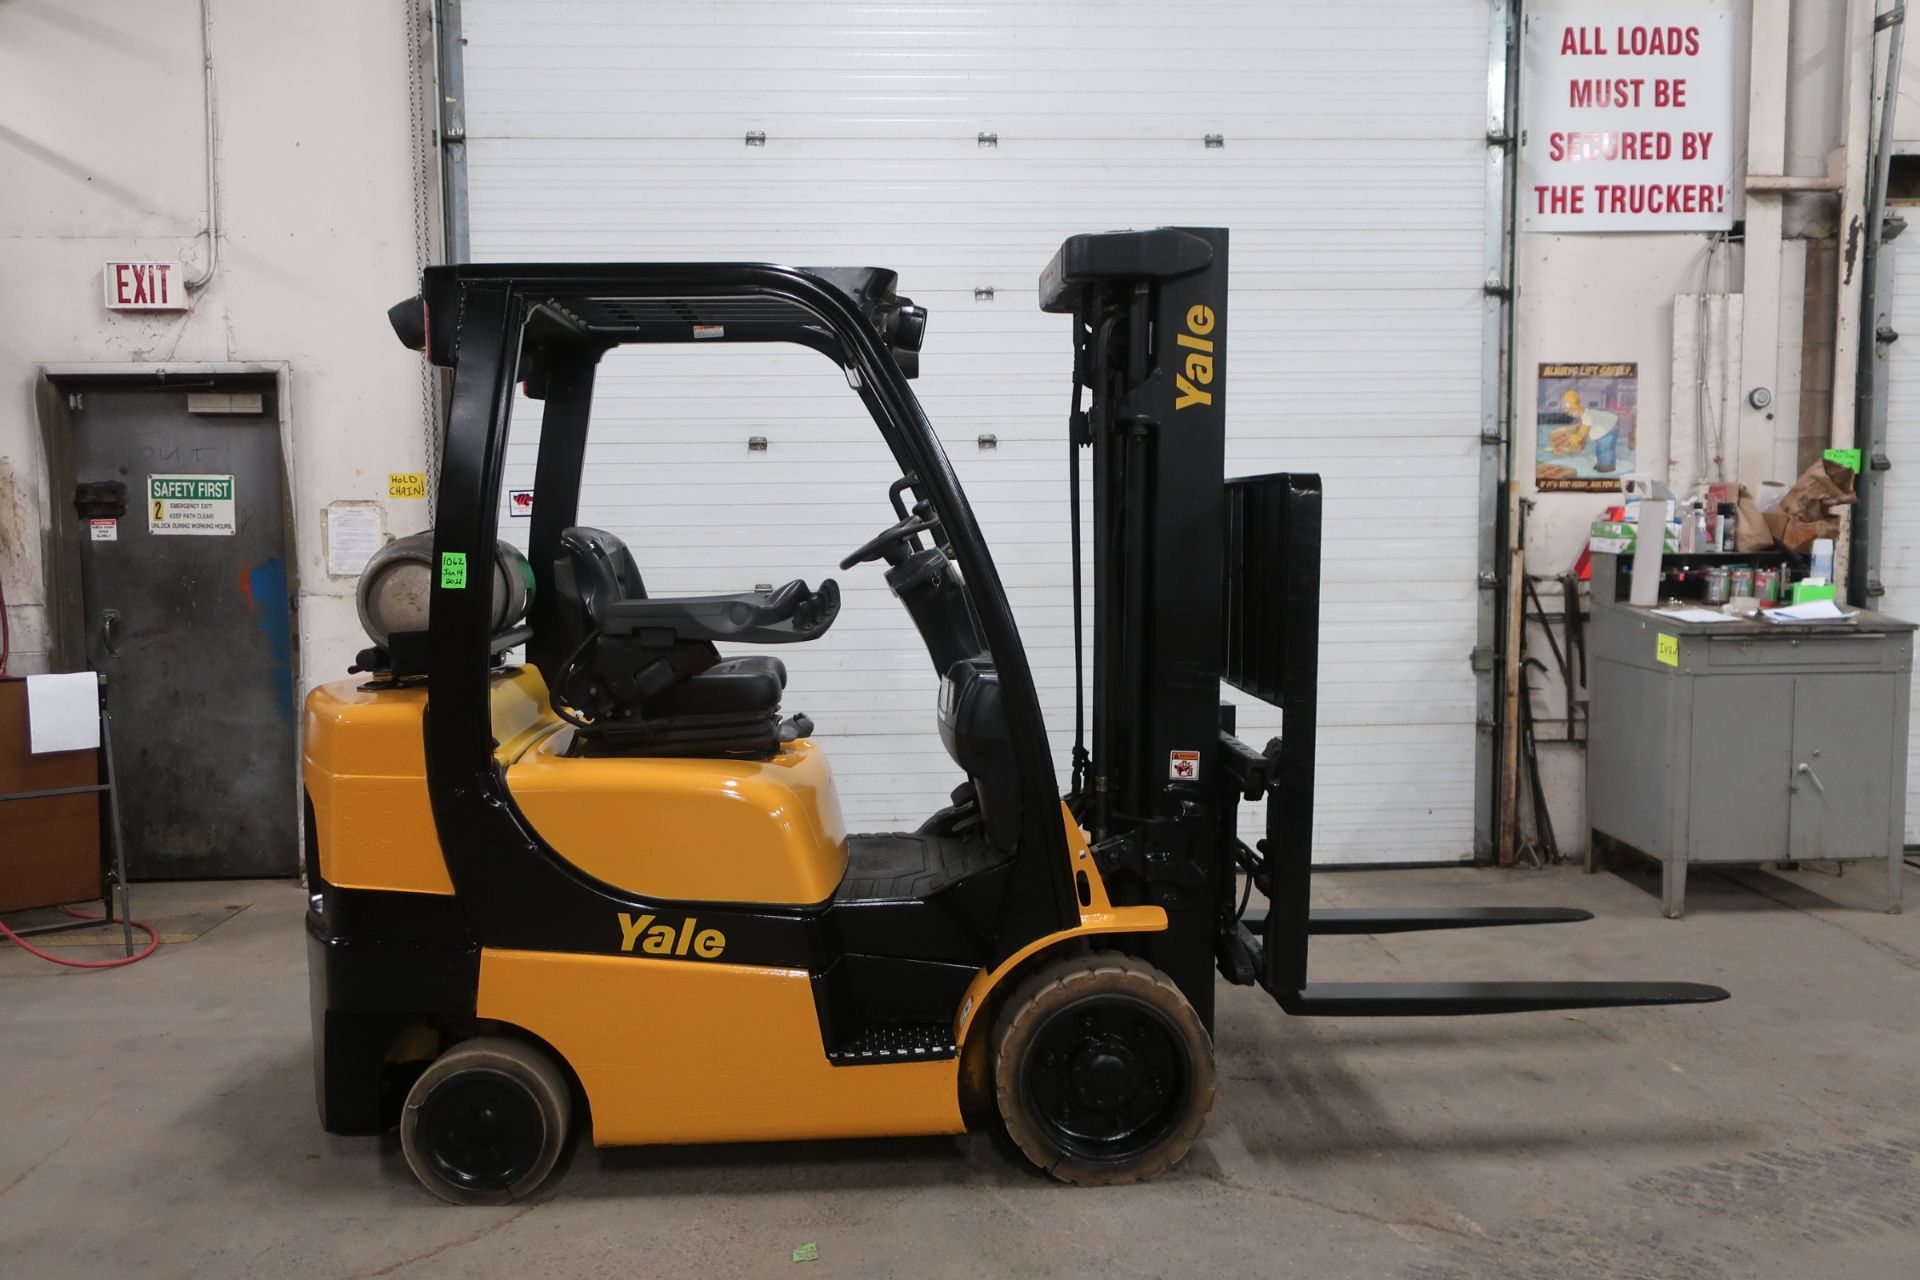 FREE CUSTOMS - 2015 Yale 6000lbs capacity LPG (propane) Forklift with 3-stage mast and sideshift and